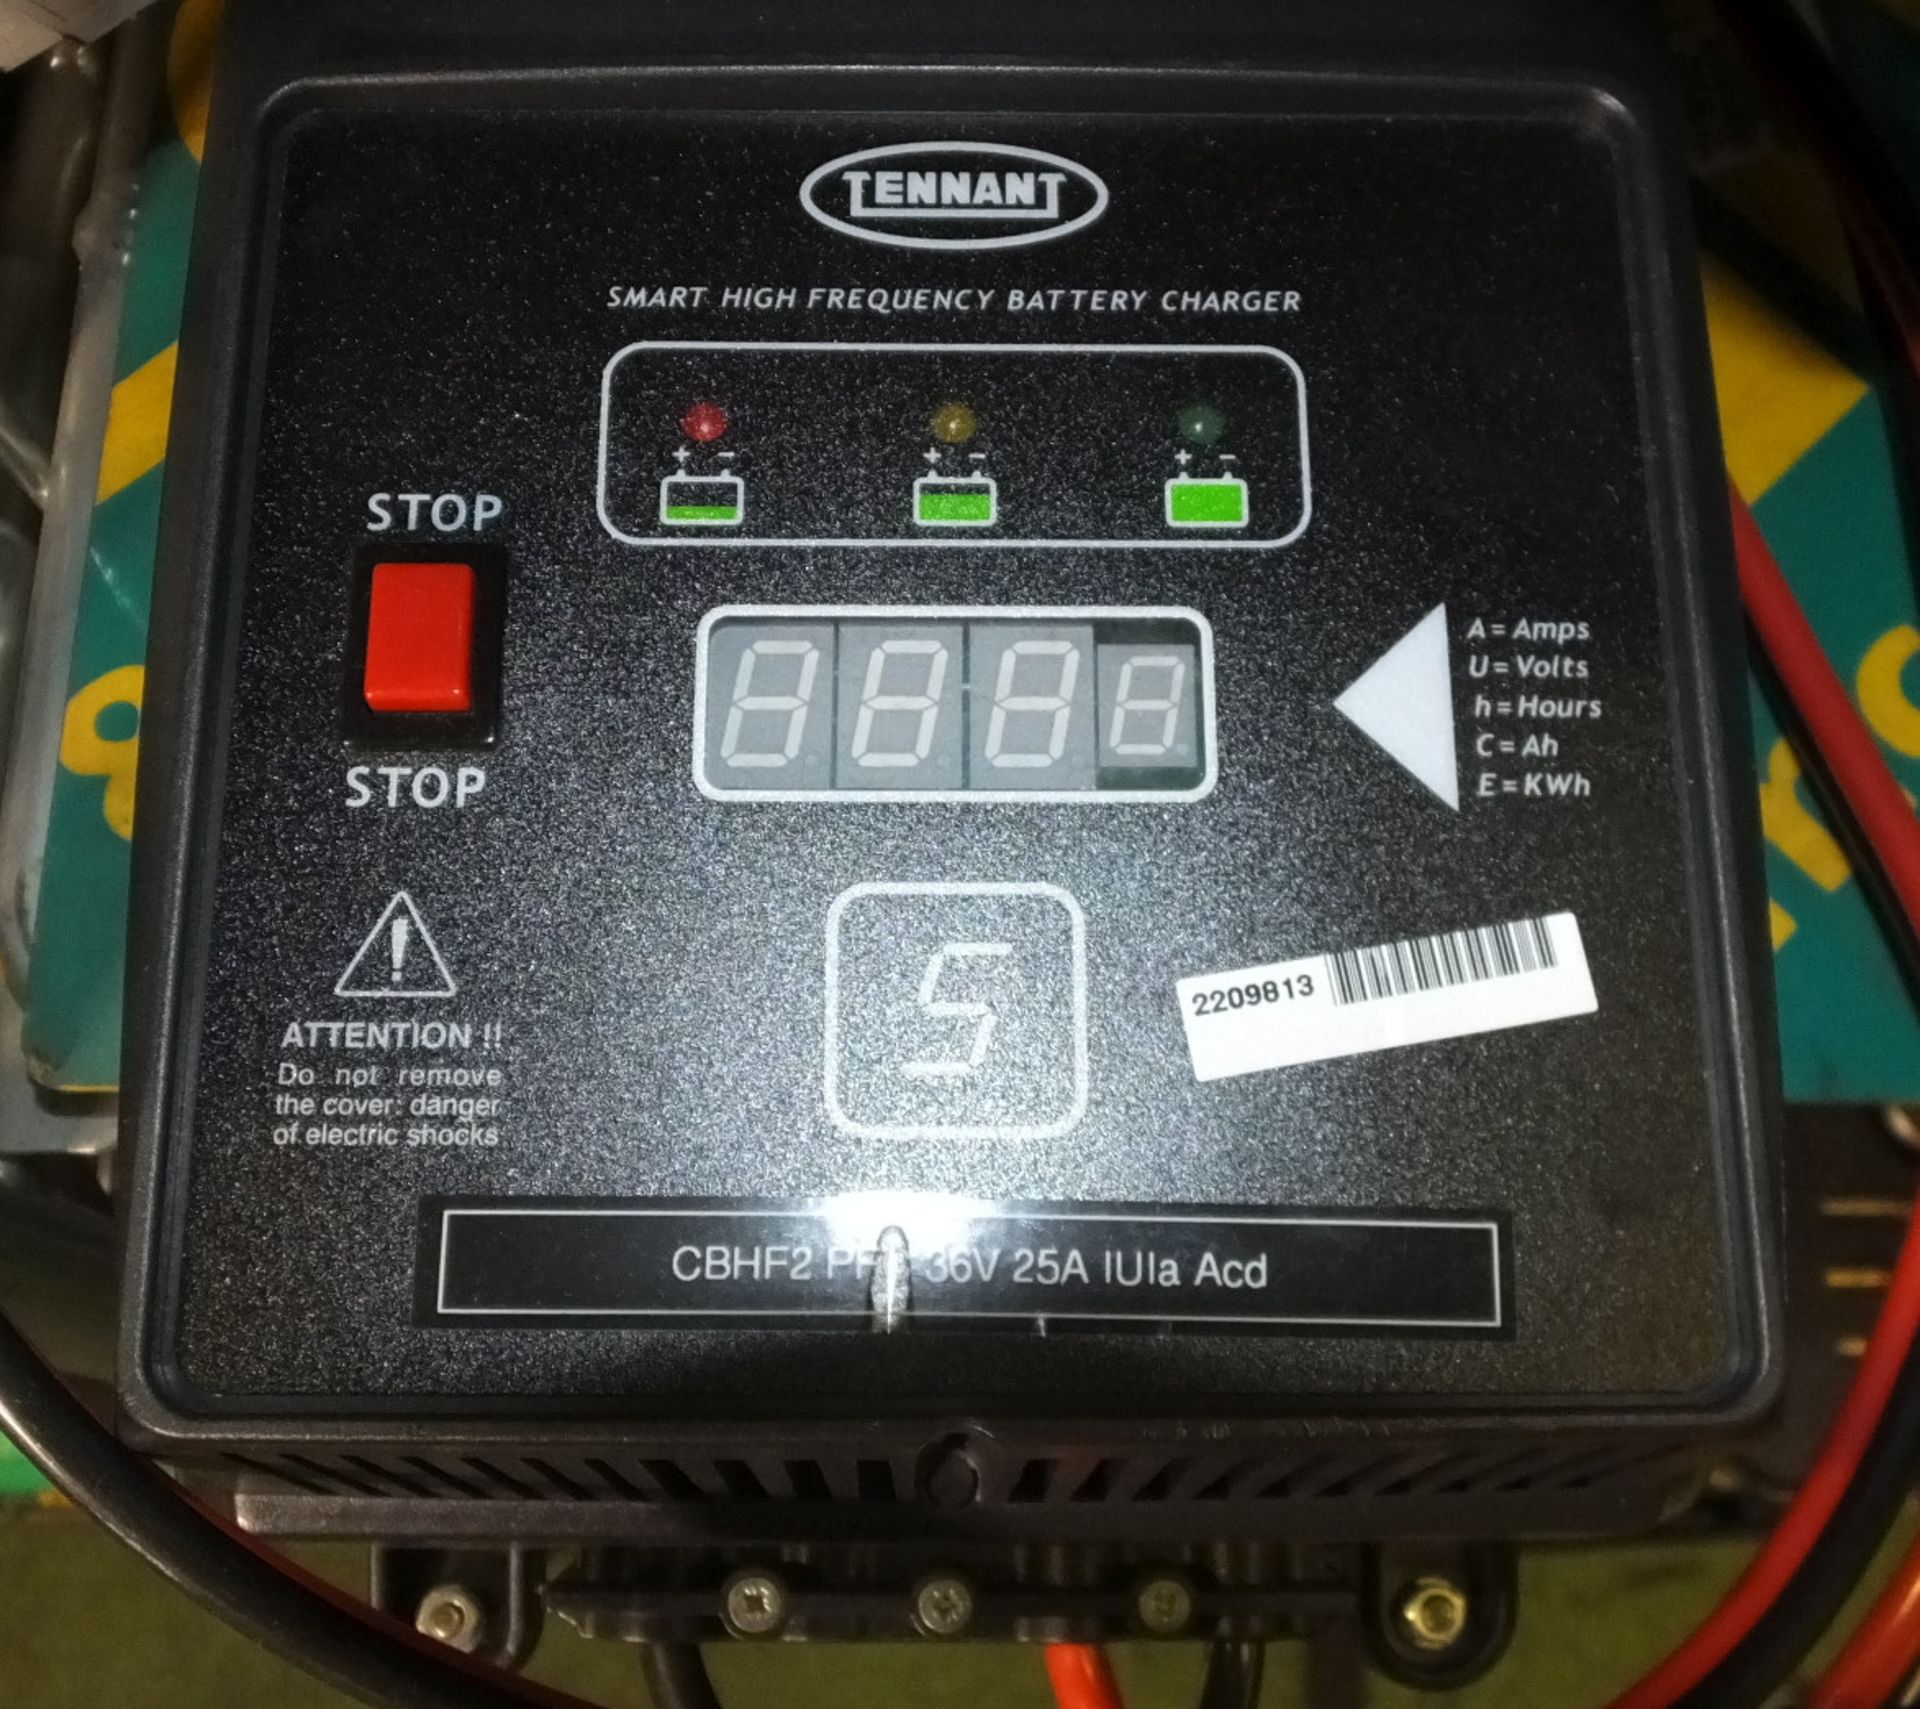 Tennant CBHF2 PFC 36V 25A IULA ACD Battery Charger - Image 2 of 4